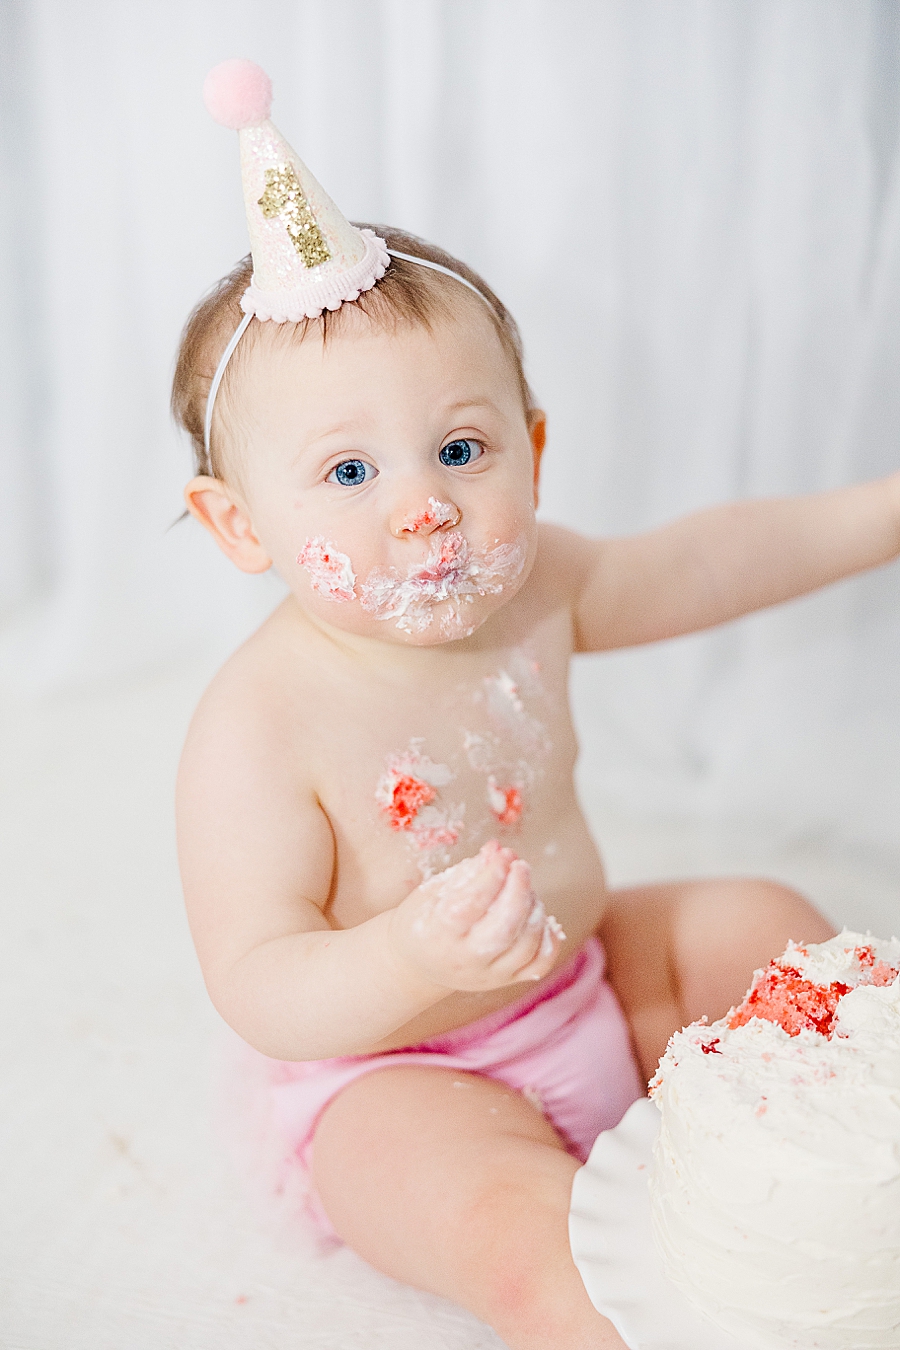 Baby girl covered in icing at cake smash